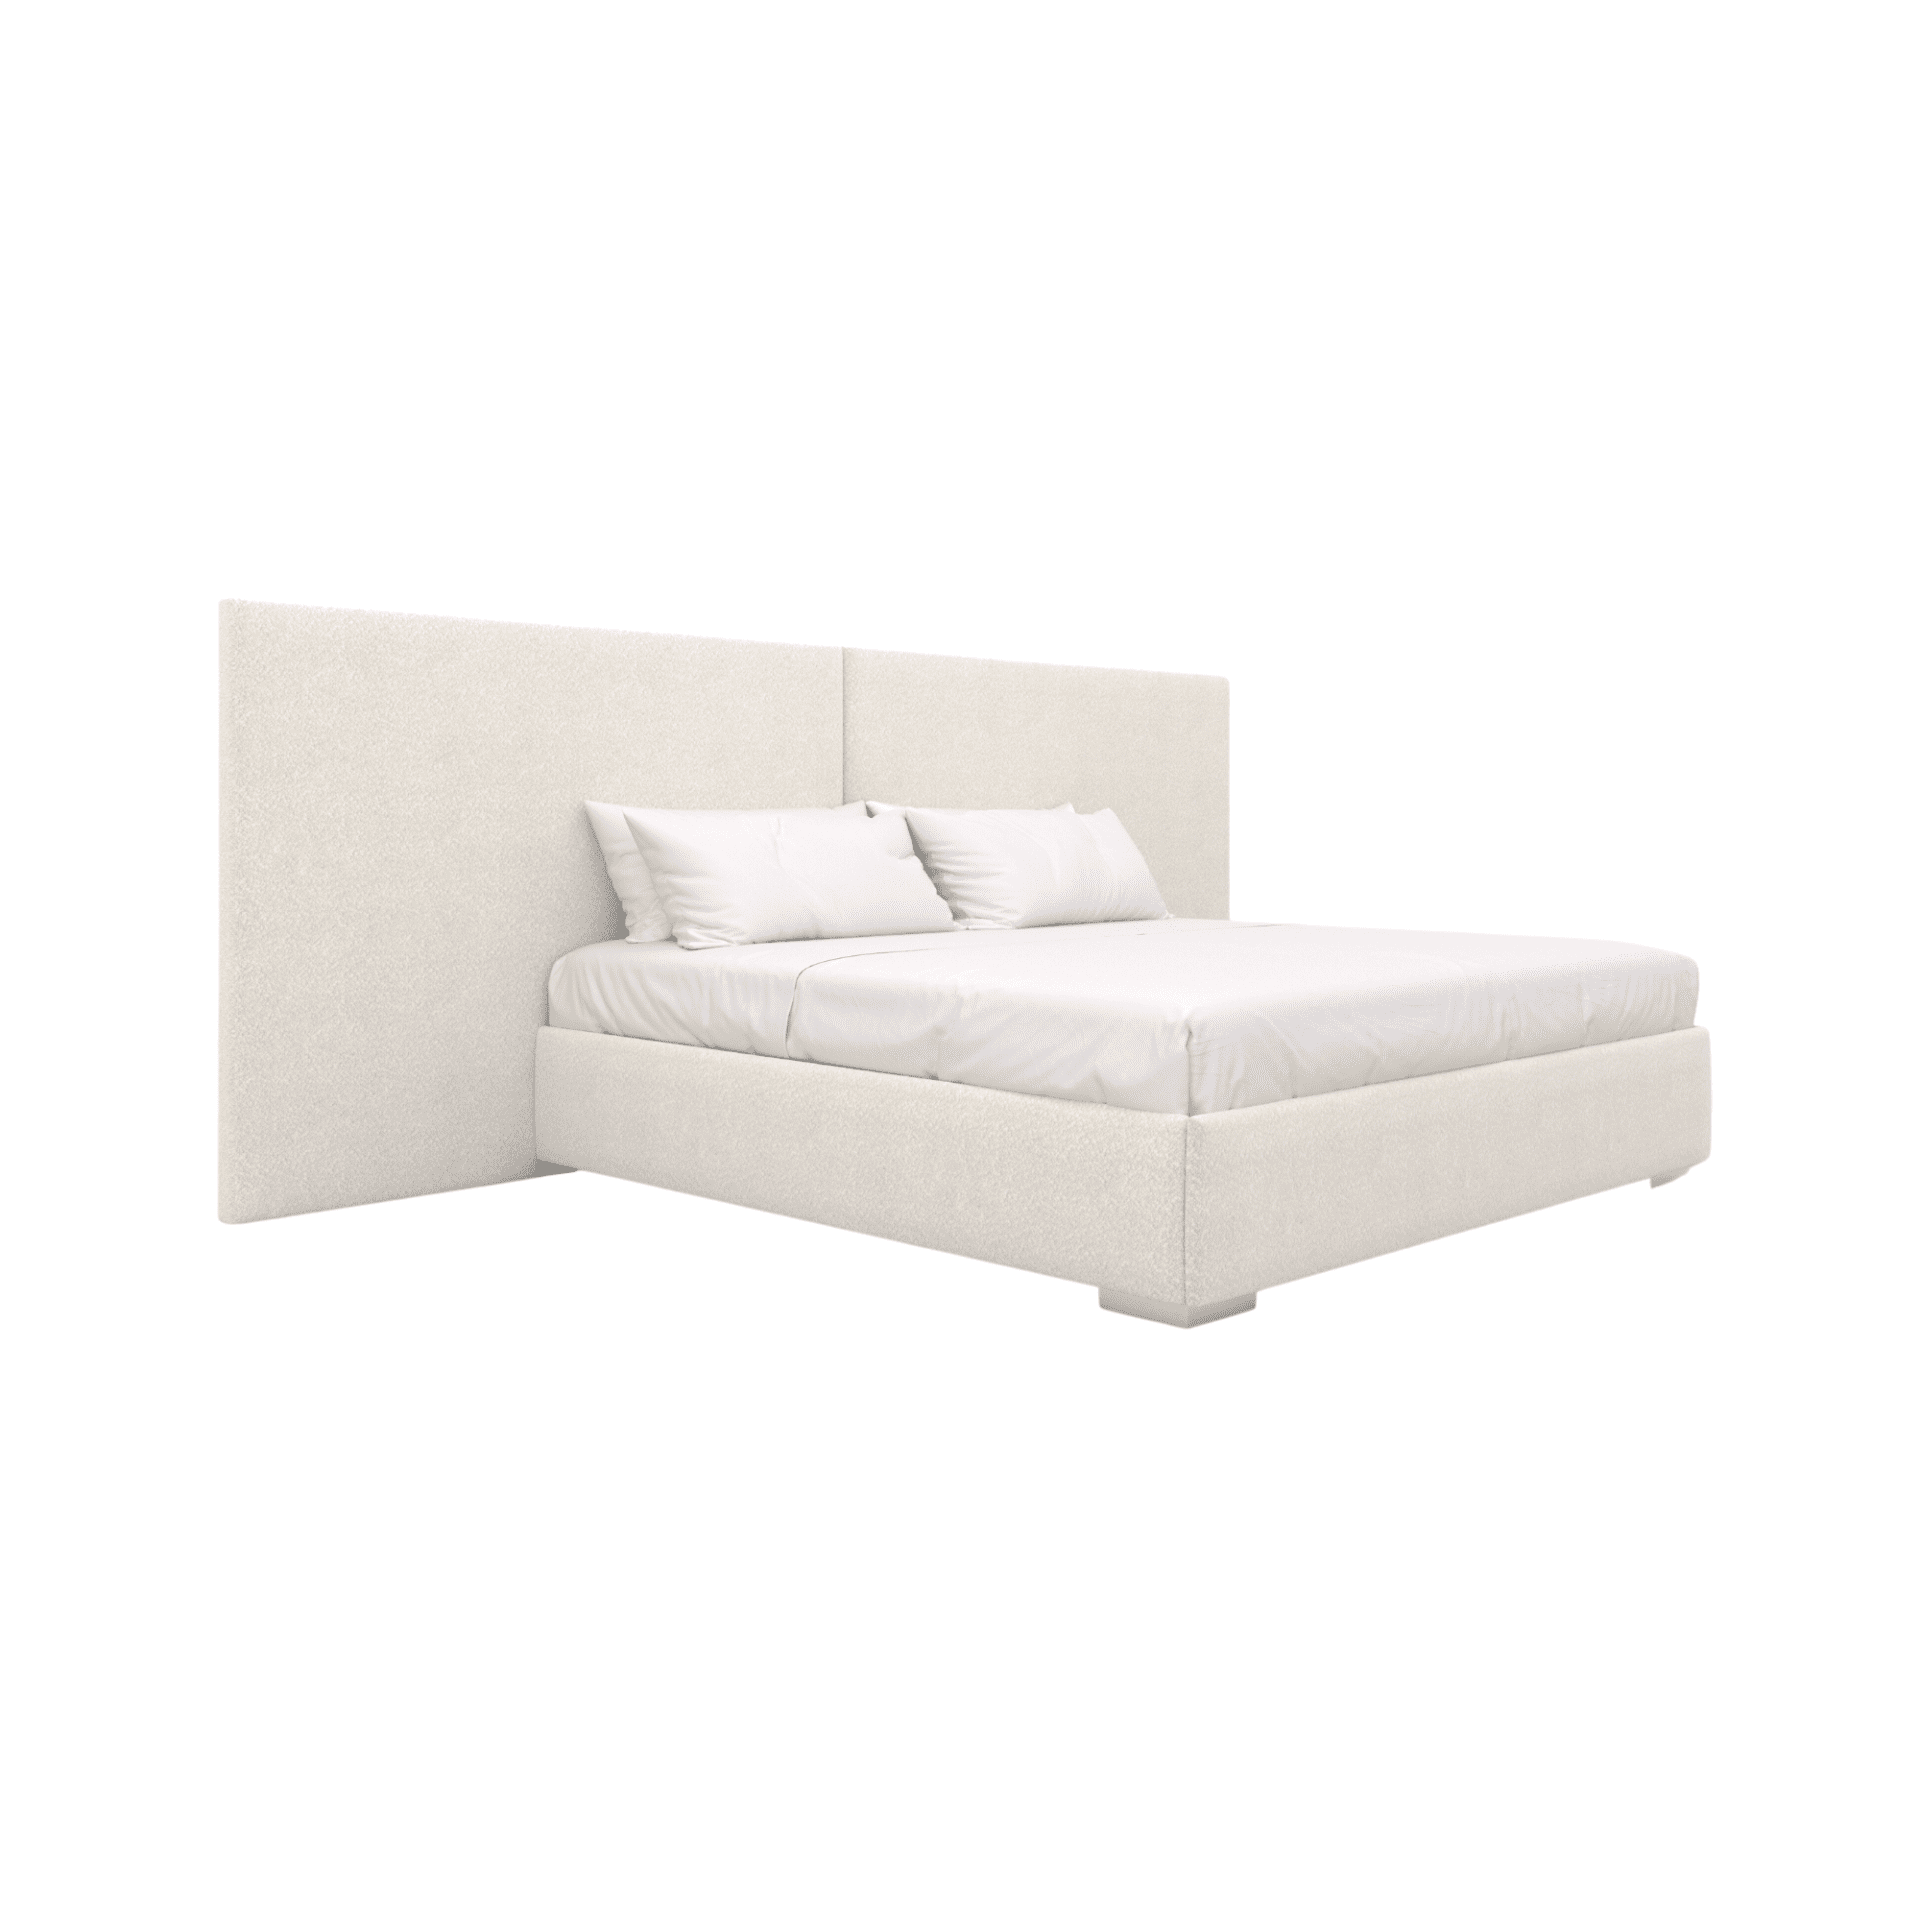 ORCHESTRA Freestanding Upholstered Headboard & Bed, Luxury Furniture - Blend Home Furnishings